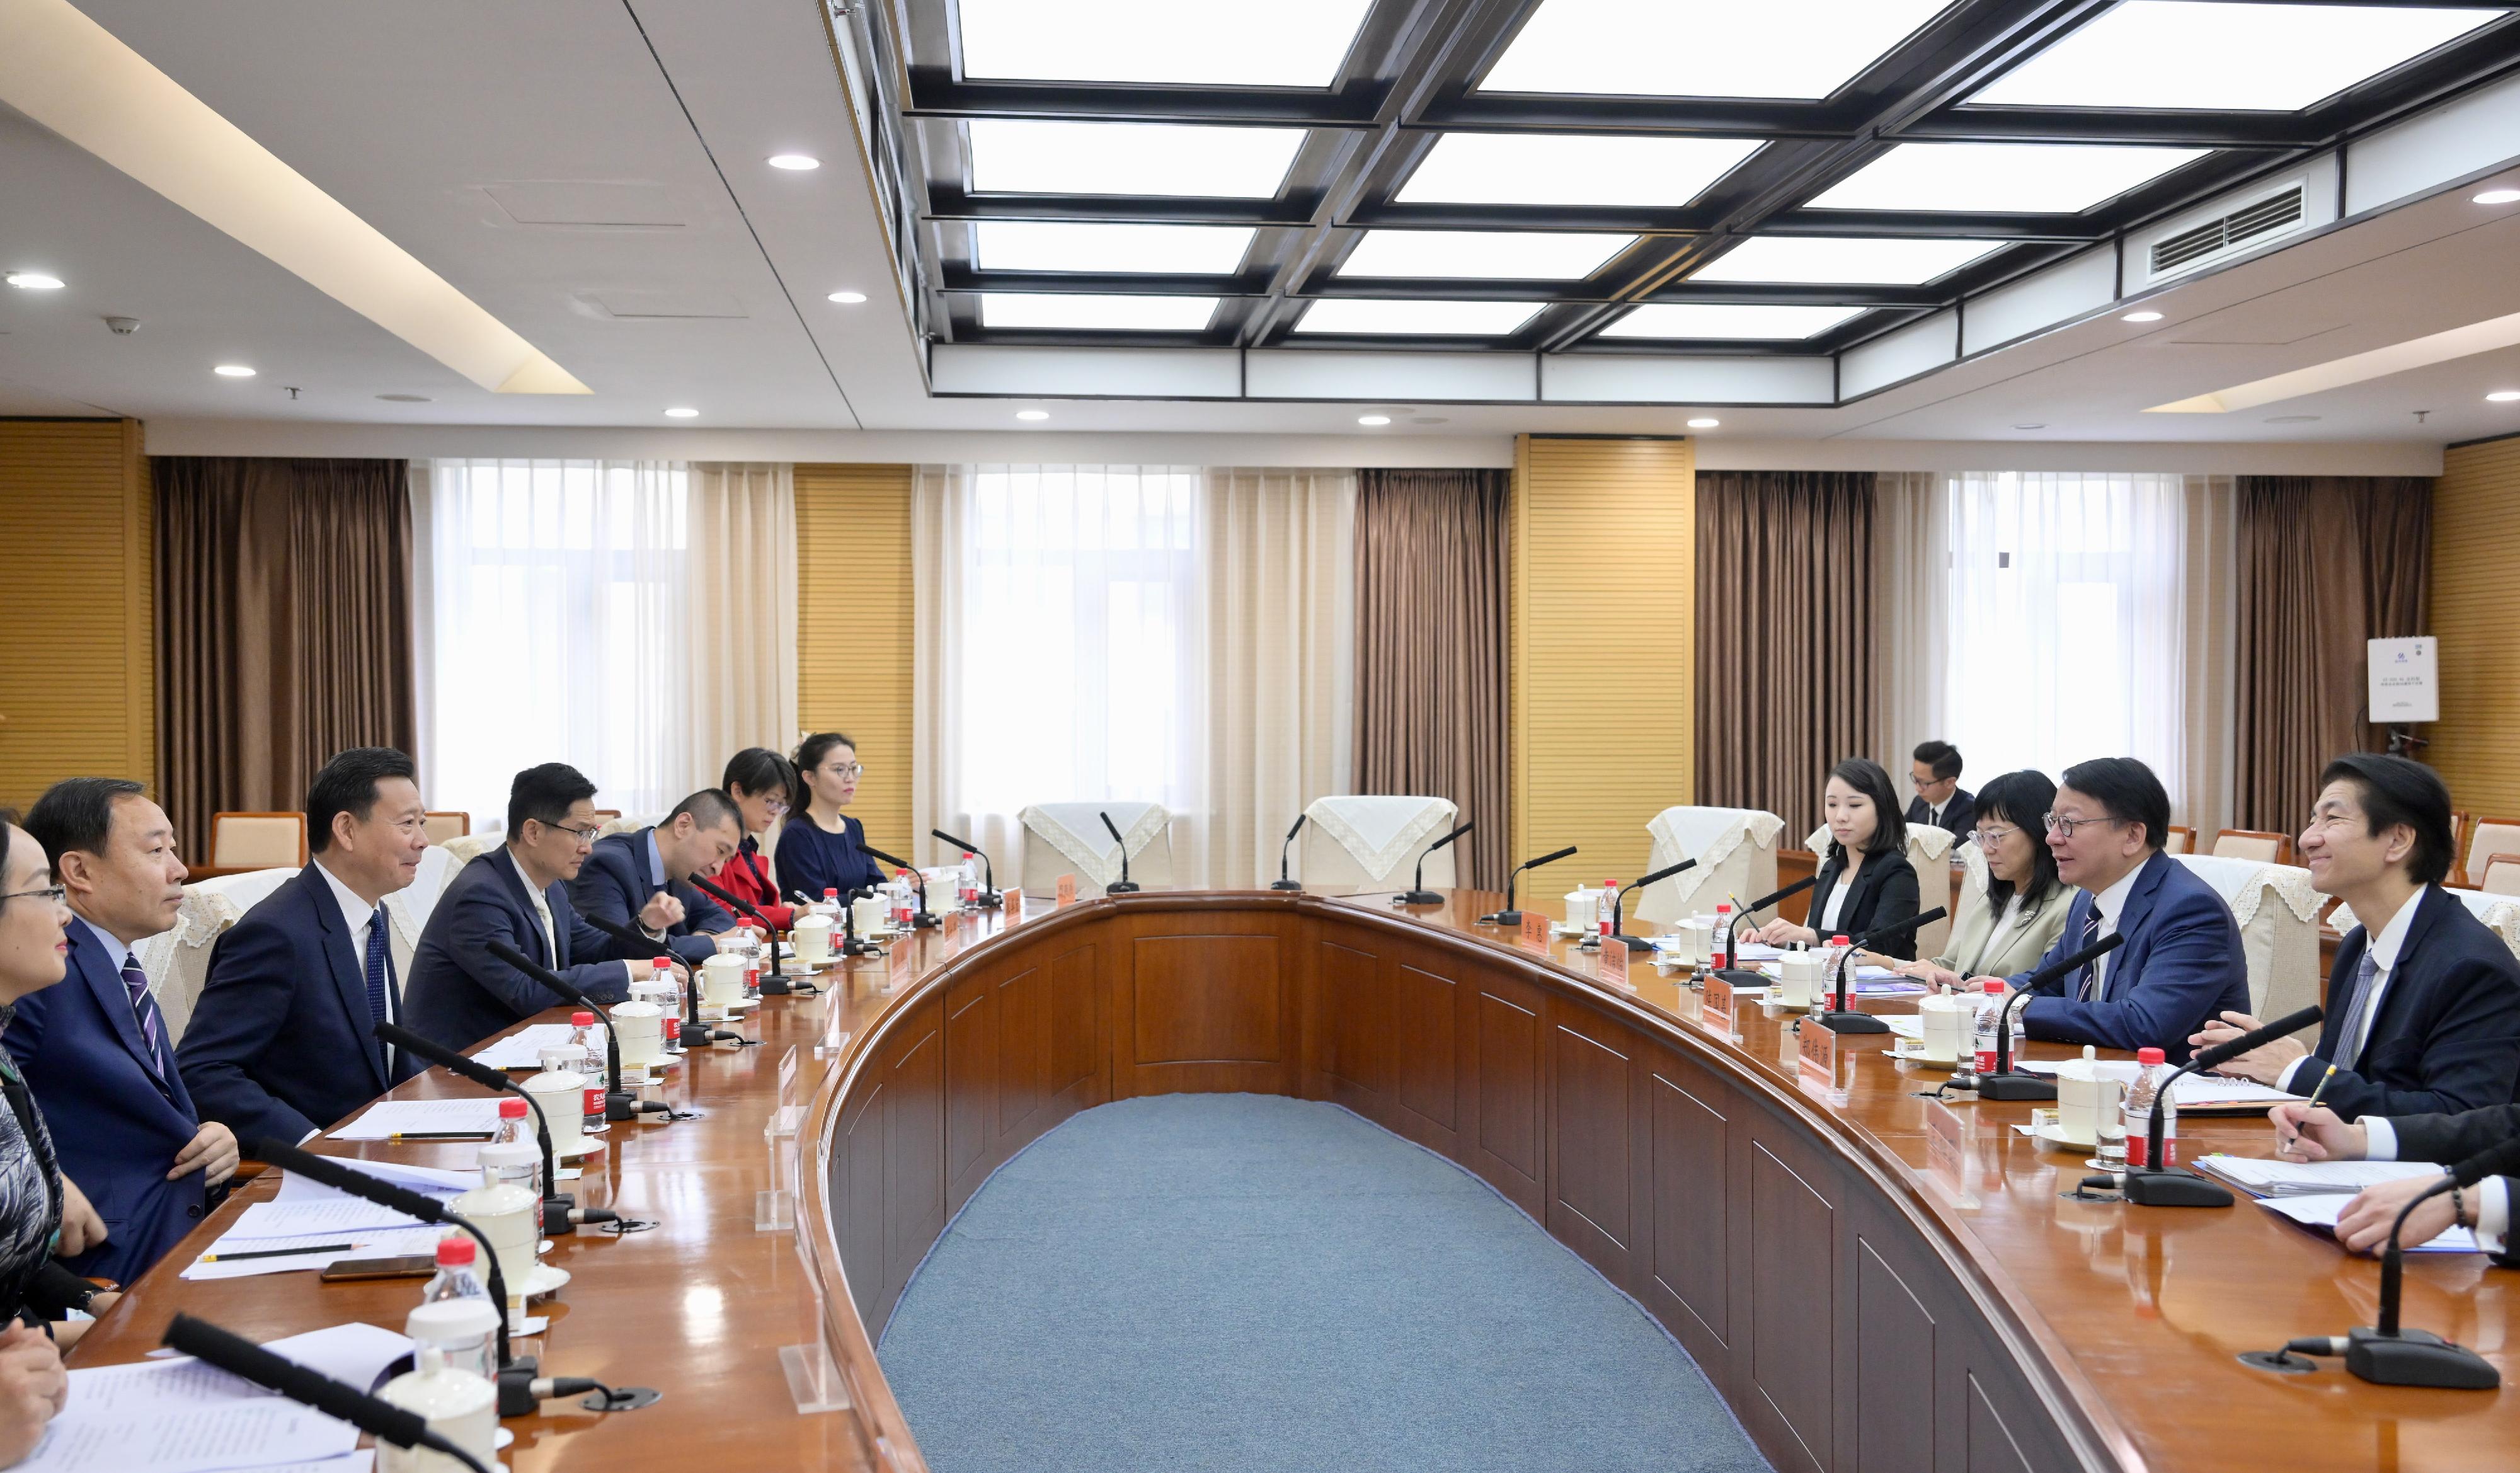 The Chief Secretary for Administration, Mr Chan Kwok-ki (second right), meets with Vice-Minister of Culture and Tourism and Administrator of the National Cultural Heritage Administration, Mr Li Qun (third left), in Beijing today (April 27). Also attending the meeting is the Director of the Office of the Government of the Hong Kong Special Administrative Region in Beijing, Mr Rex Chang (first right). 